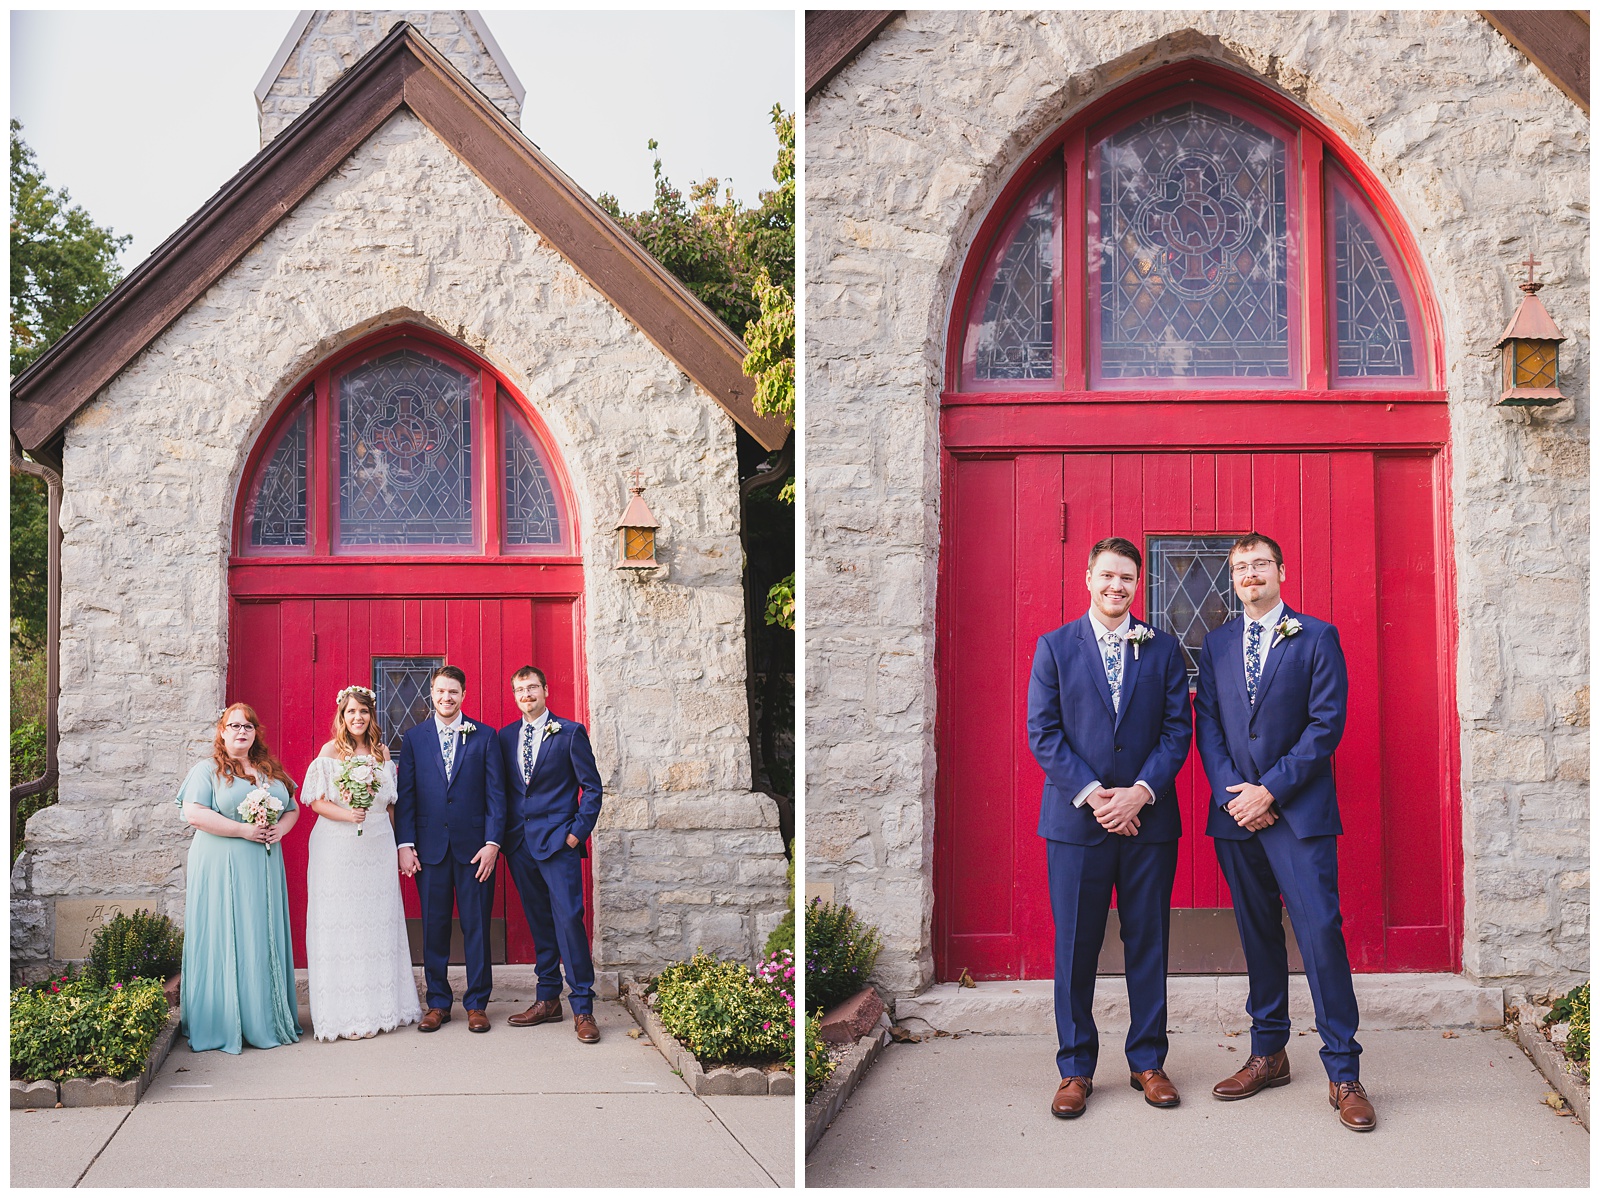 Wedding photography at St. Luke's Episcopal Church in Excelsior Springs by Kansas City wedding photographers Wisdom-Watson Weddings.